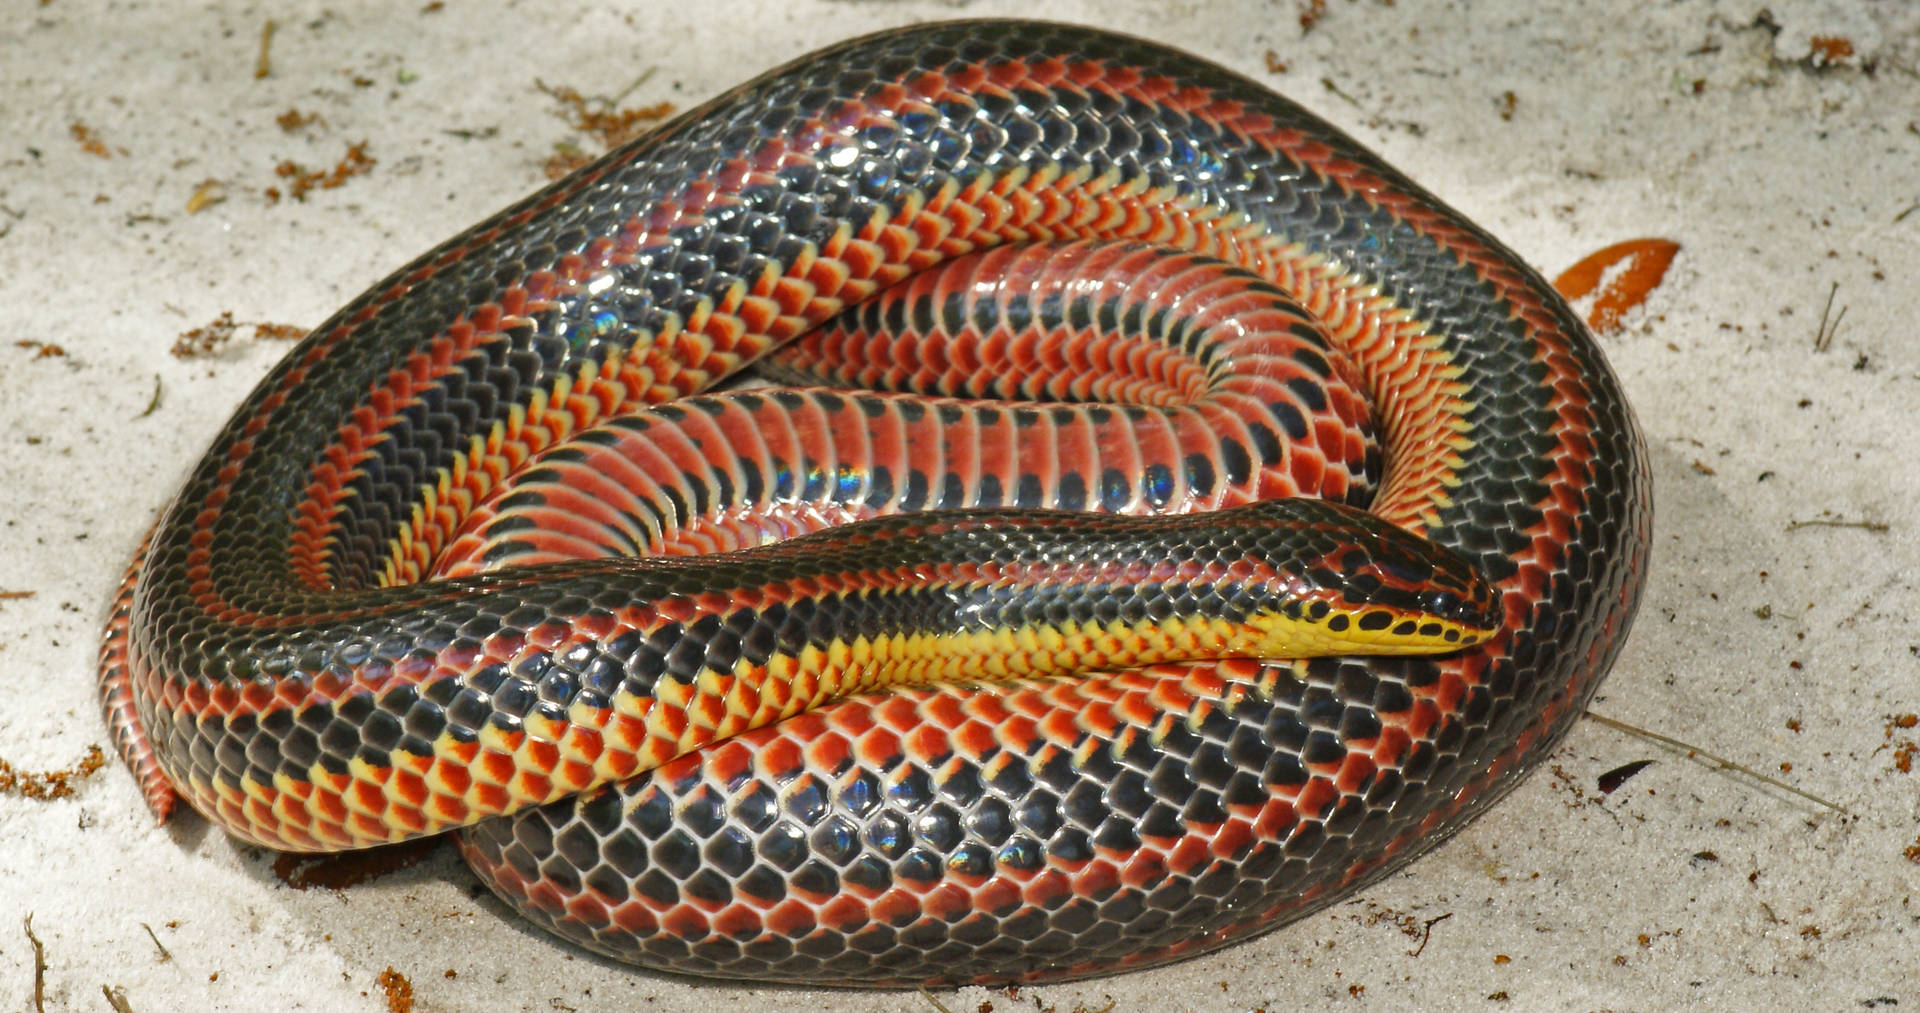 Mud Snake With Stunning Iridescent Scales Wallpaper